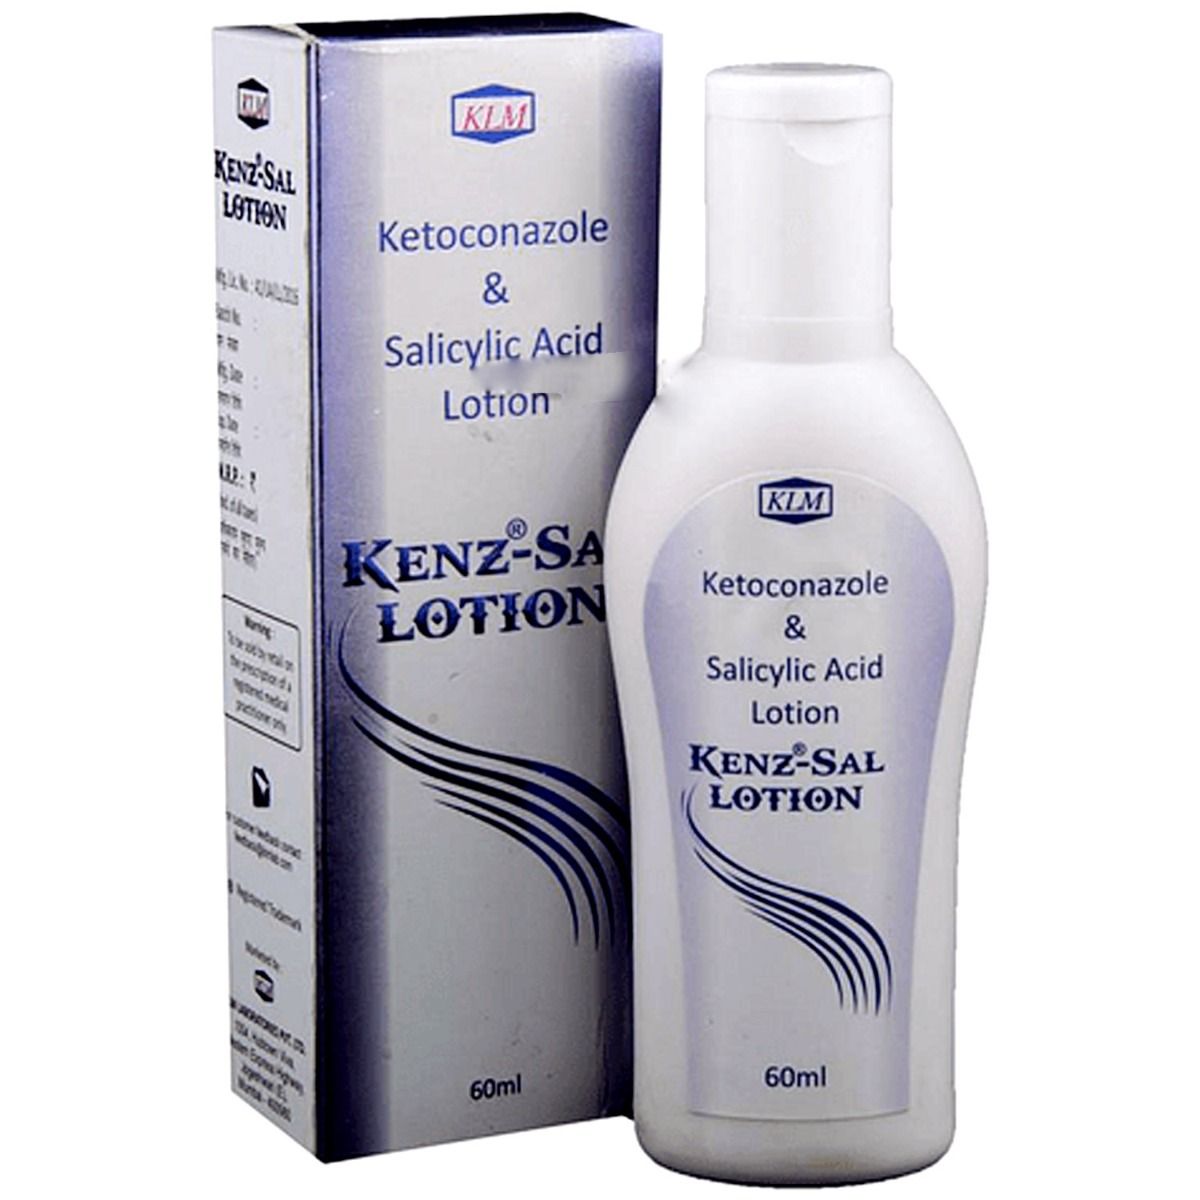 Kenz Sal Lotion 60 ml Price, Uses, Side Effects, Composition - Apollo  Pharmacy